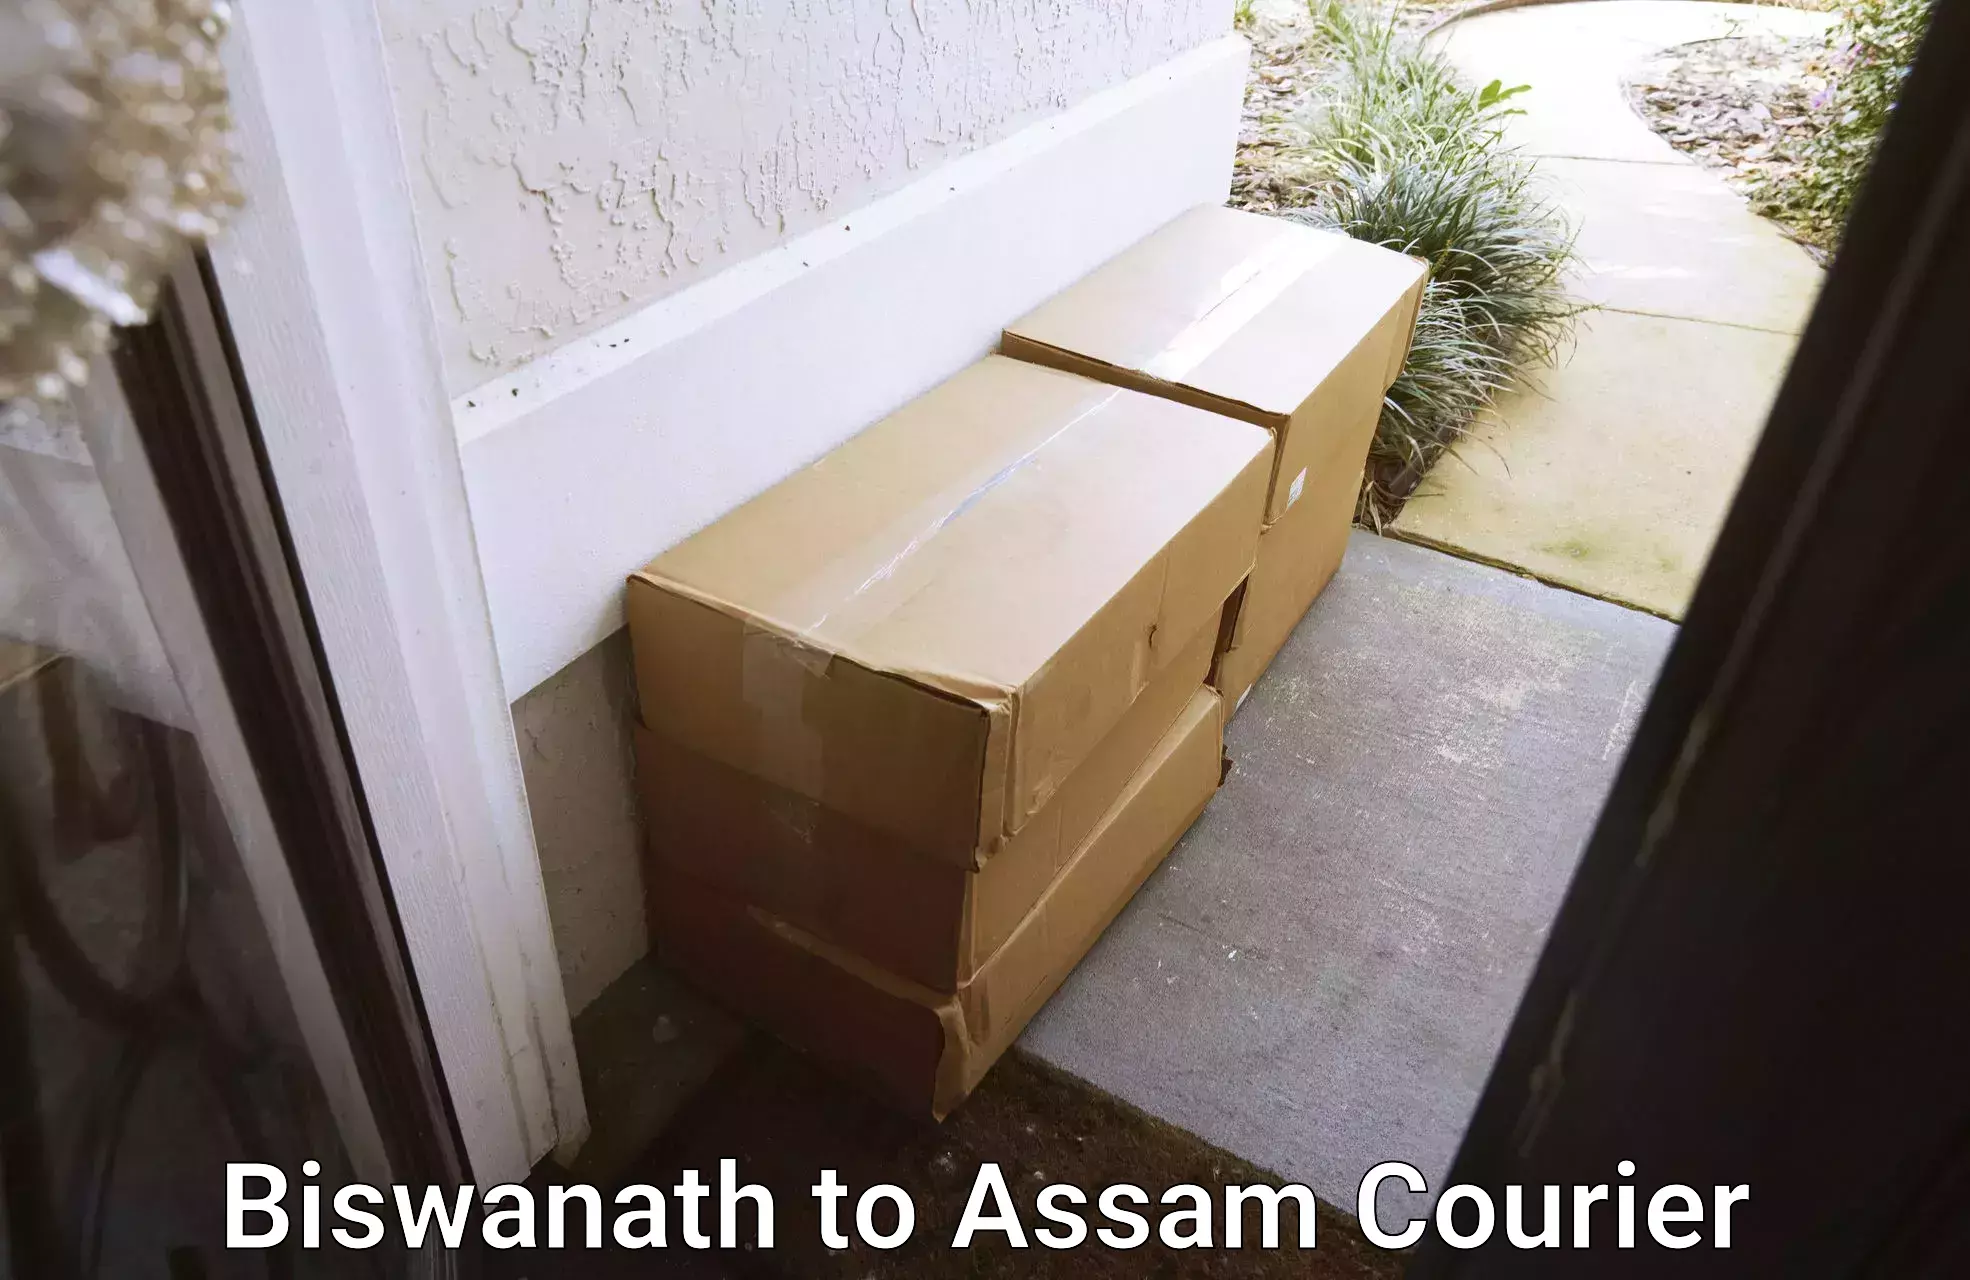 Easy access courier services in Biswanath to Dotma